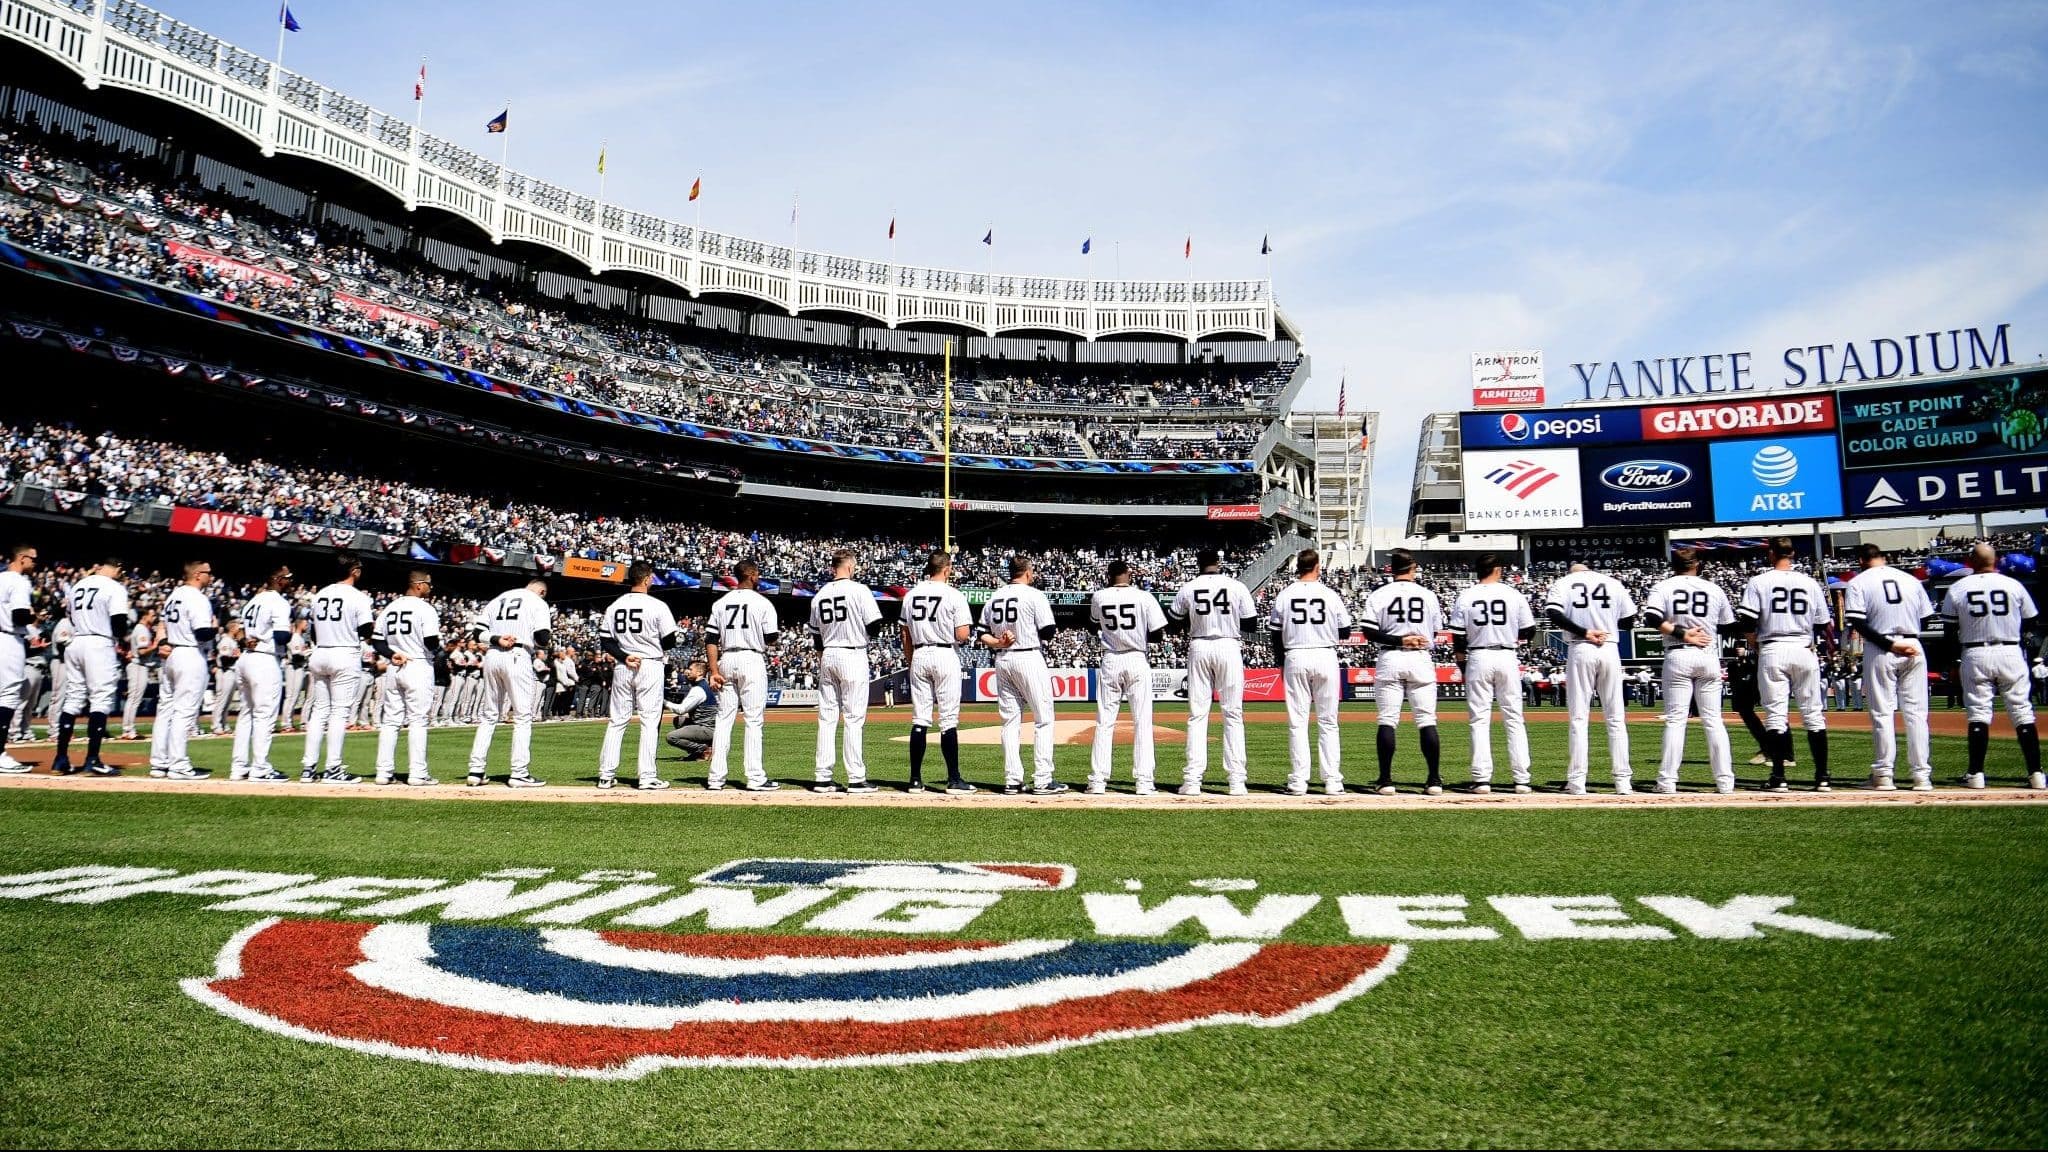 NEW YORK, NEW YORK - MARCH 28: The New York Yankees stand for the National Anthem before the game against the Baltimore Orioles on Opening Day at Yankee Stadium on March 28, 2019 in the Bronx borough of New York City.